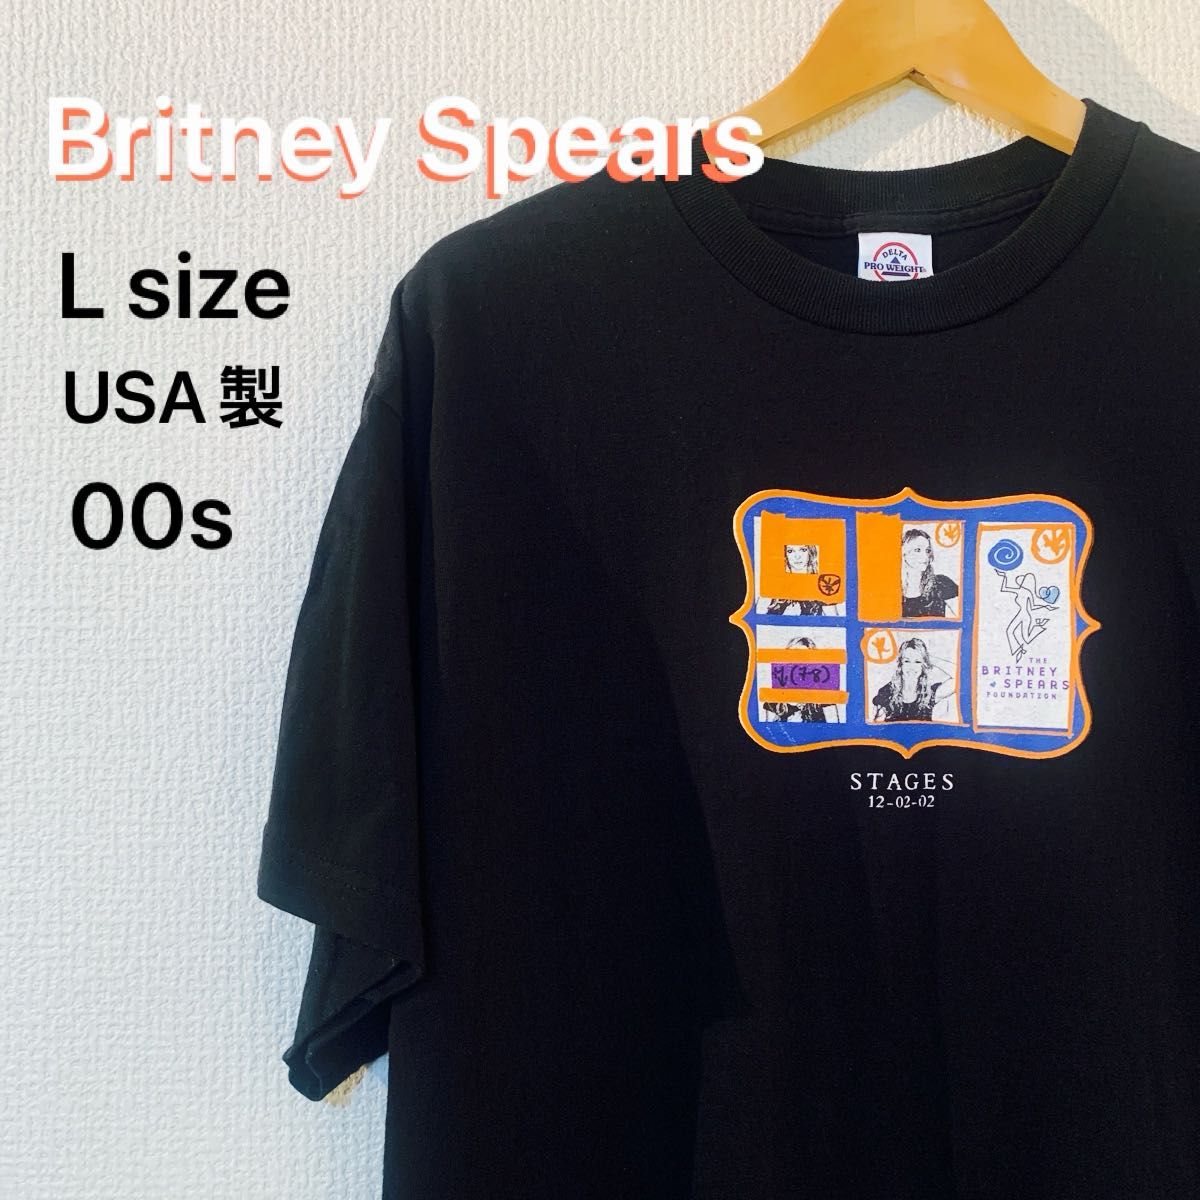 【00's】USA製　Britney Spears Tシャツ　Lサイズ　used